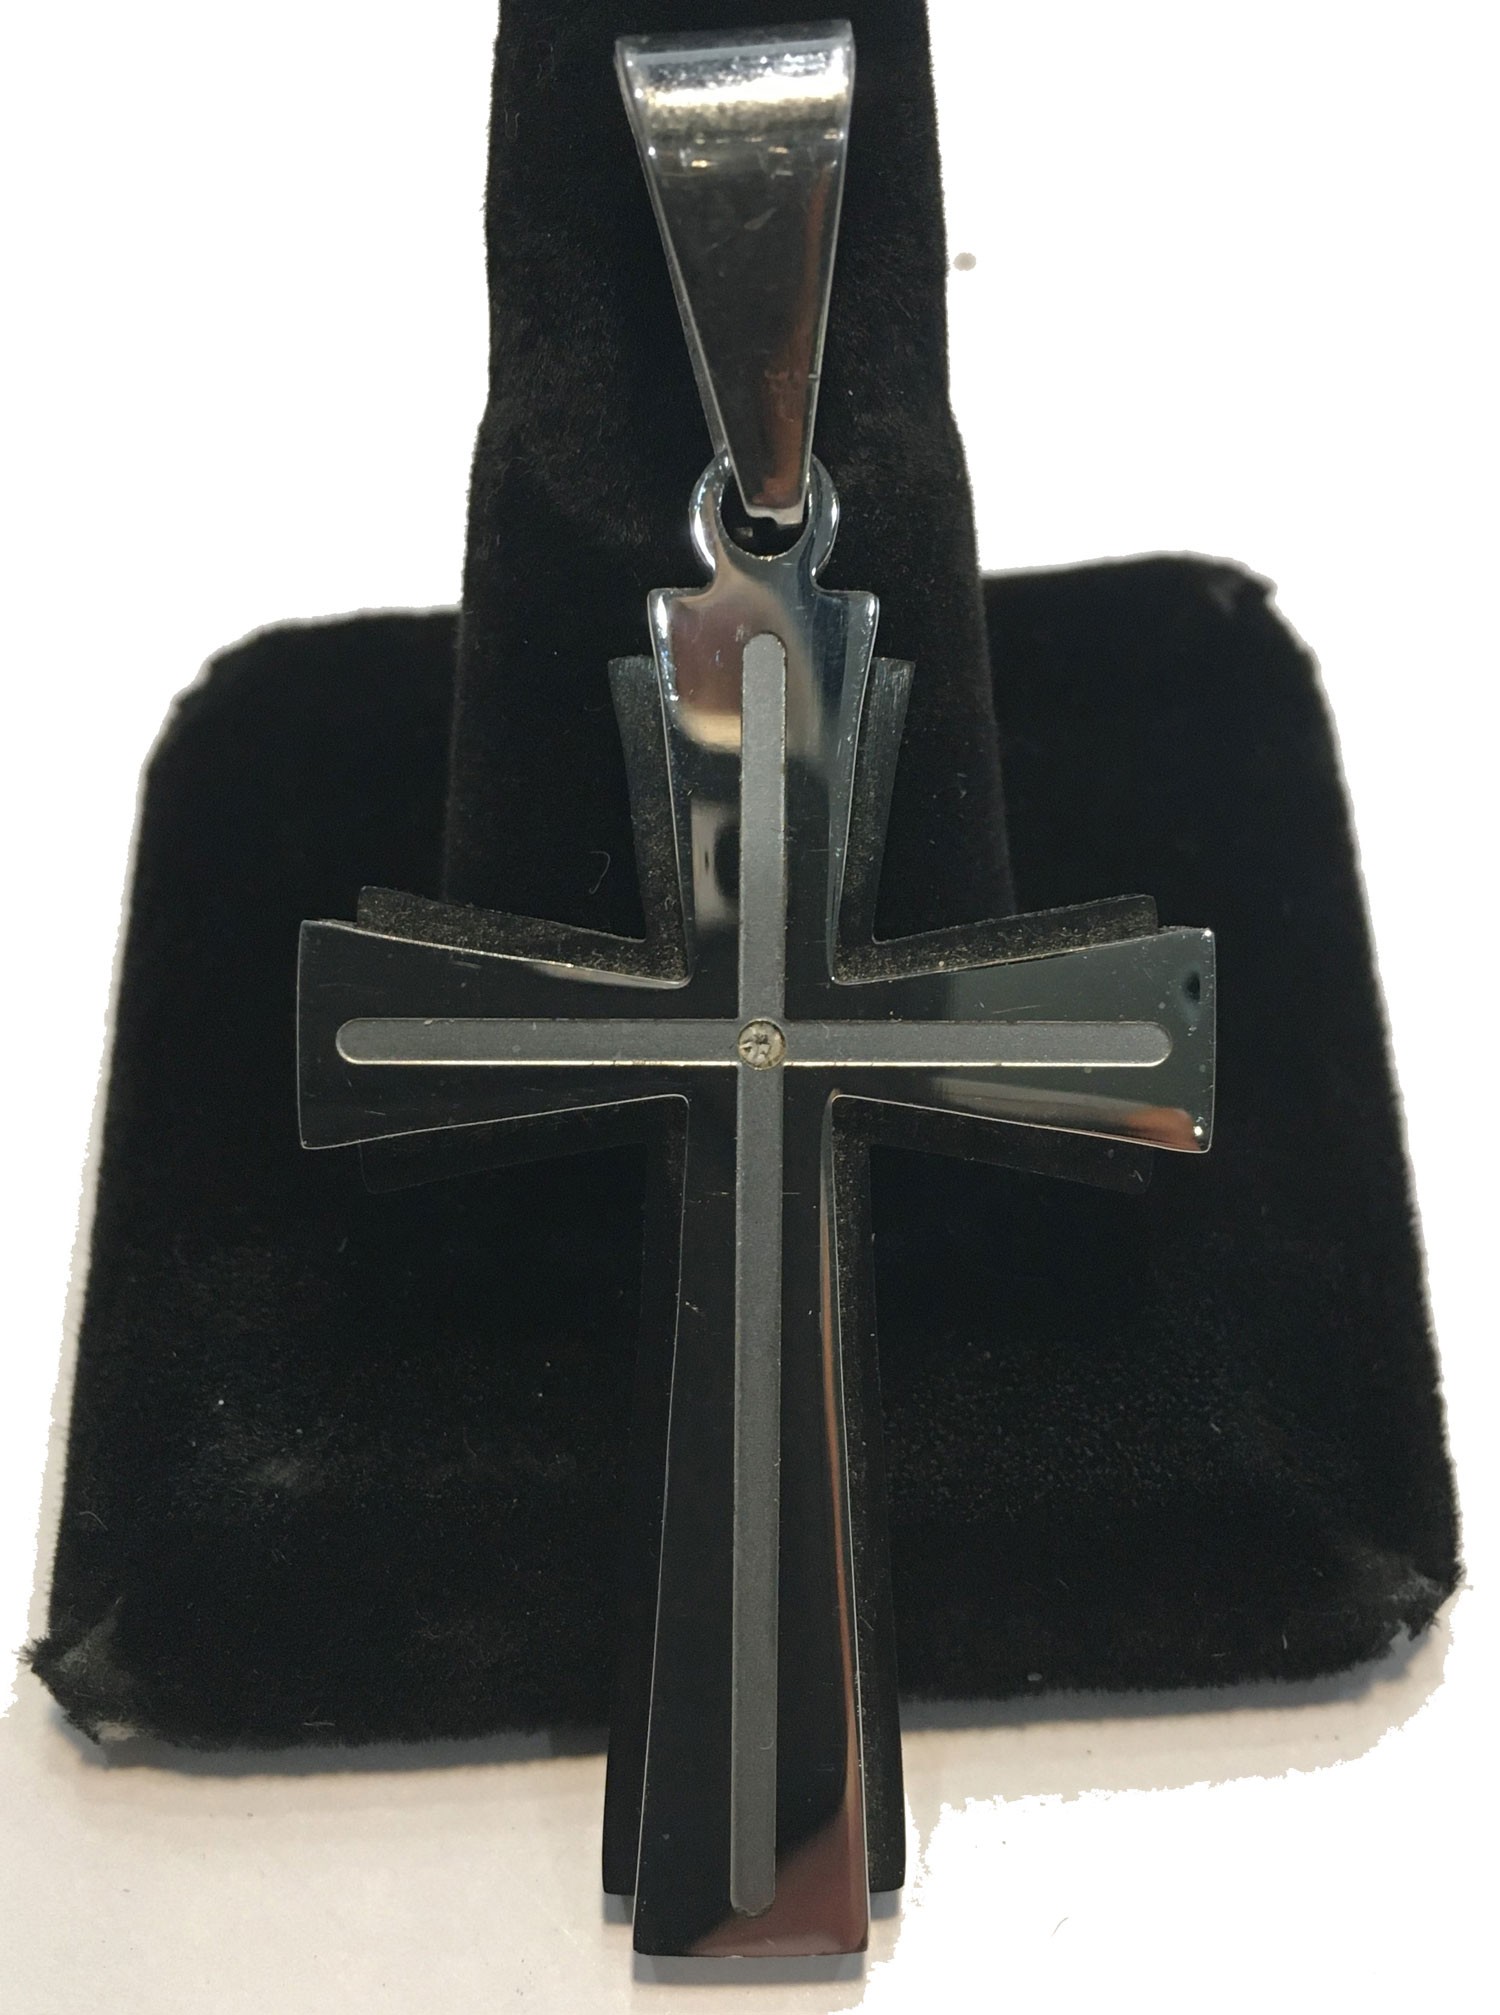 CROSS MEDIUM SILVER DOUBLE LAYER WITH BLACK BACK STAINLES STEEL